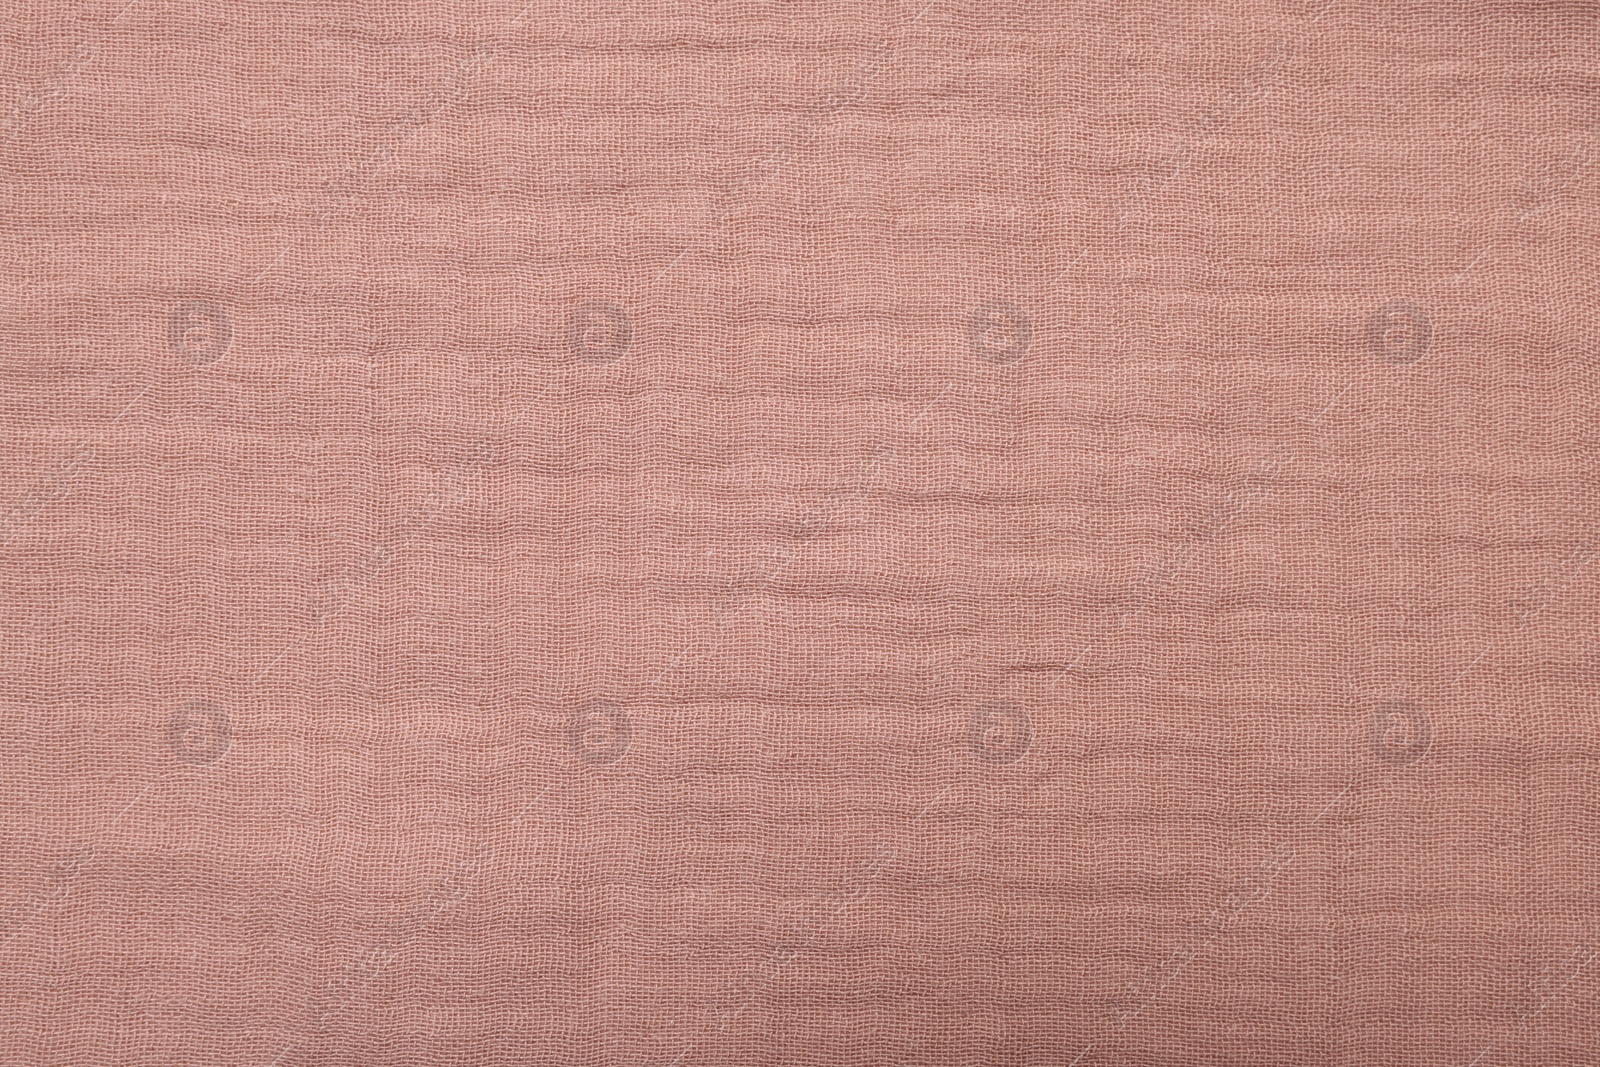 Photo of Texture of soft pastel fabric as background, closeup